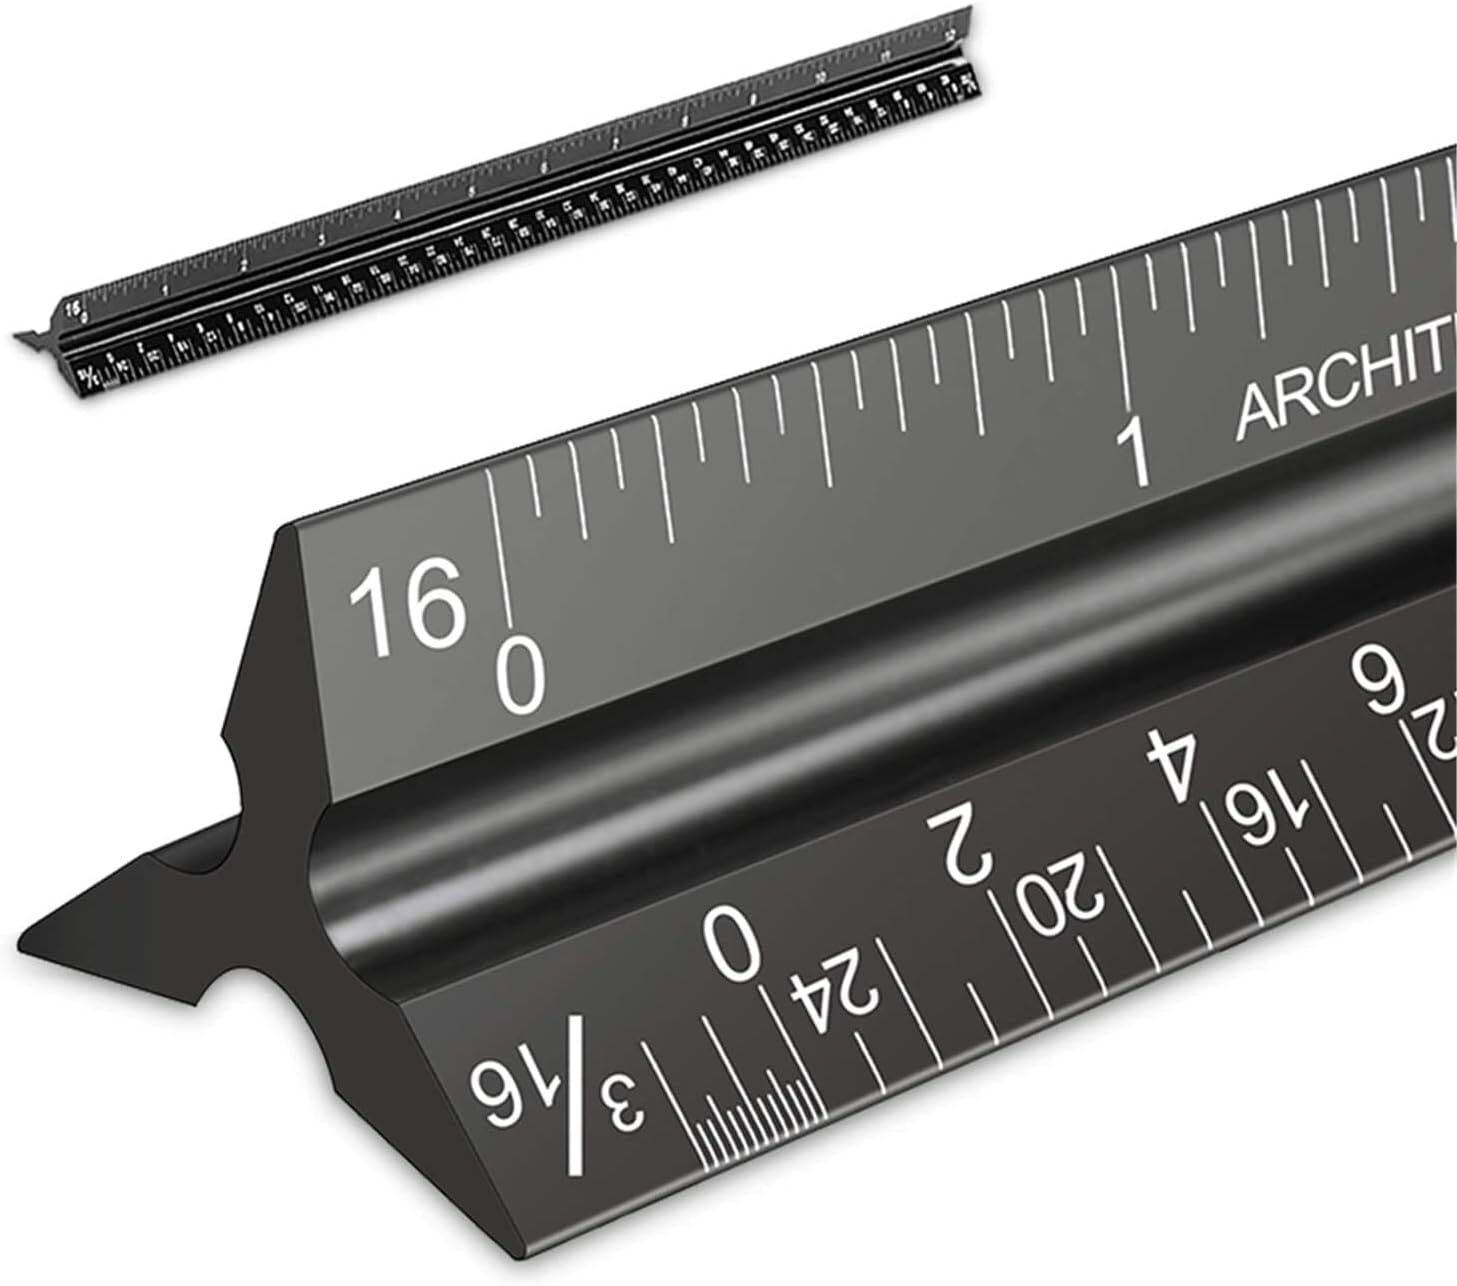 Architectural Scale Ruler for Blueprint,12\'\'Metric Metal Engineer for Architects